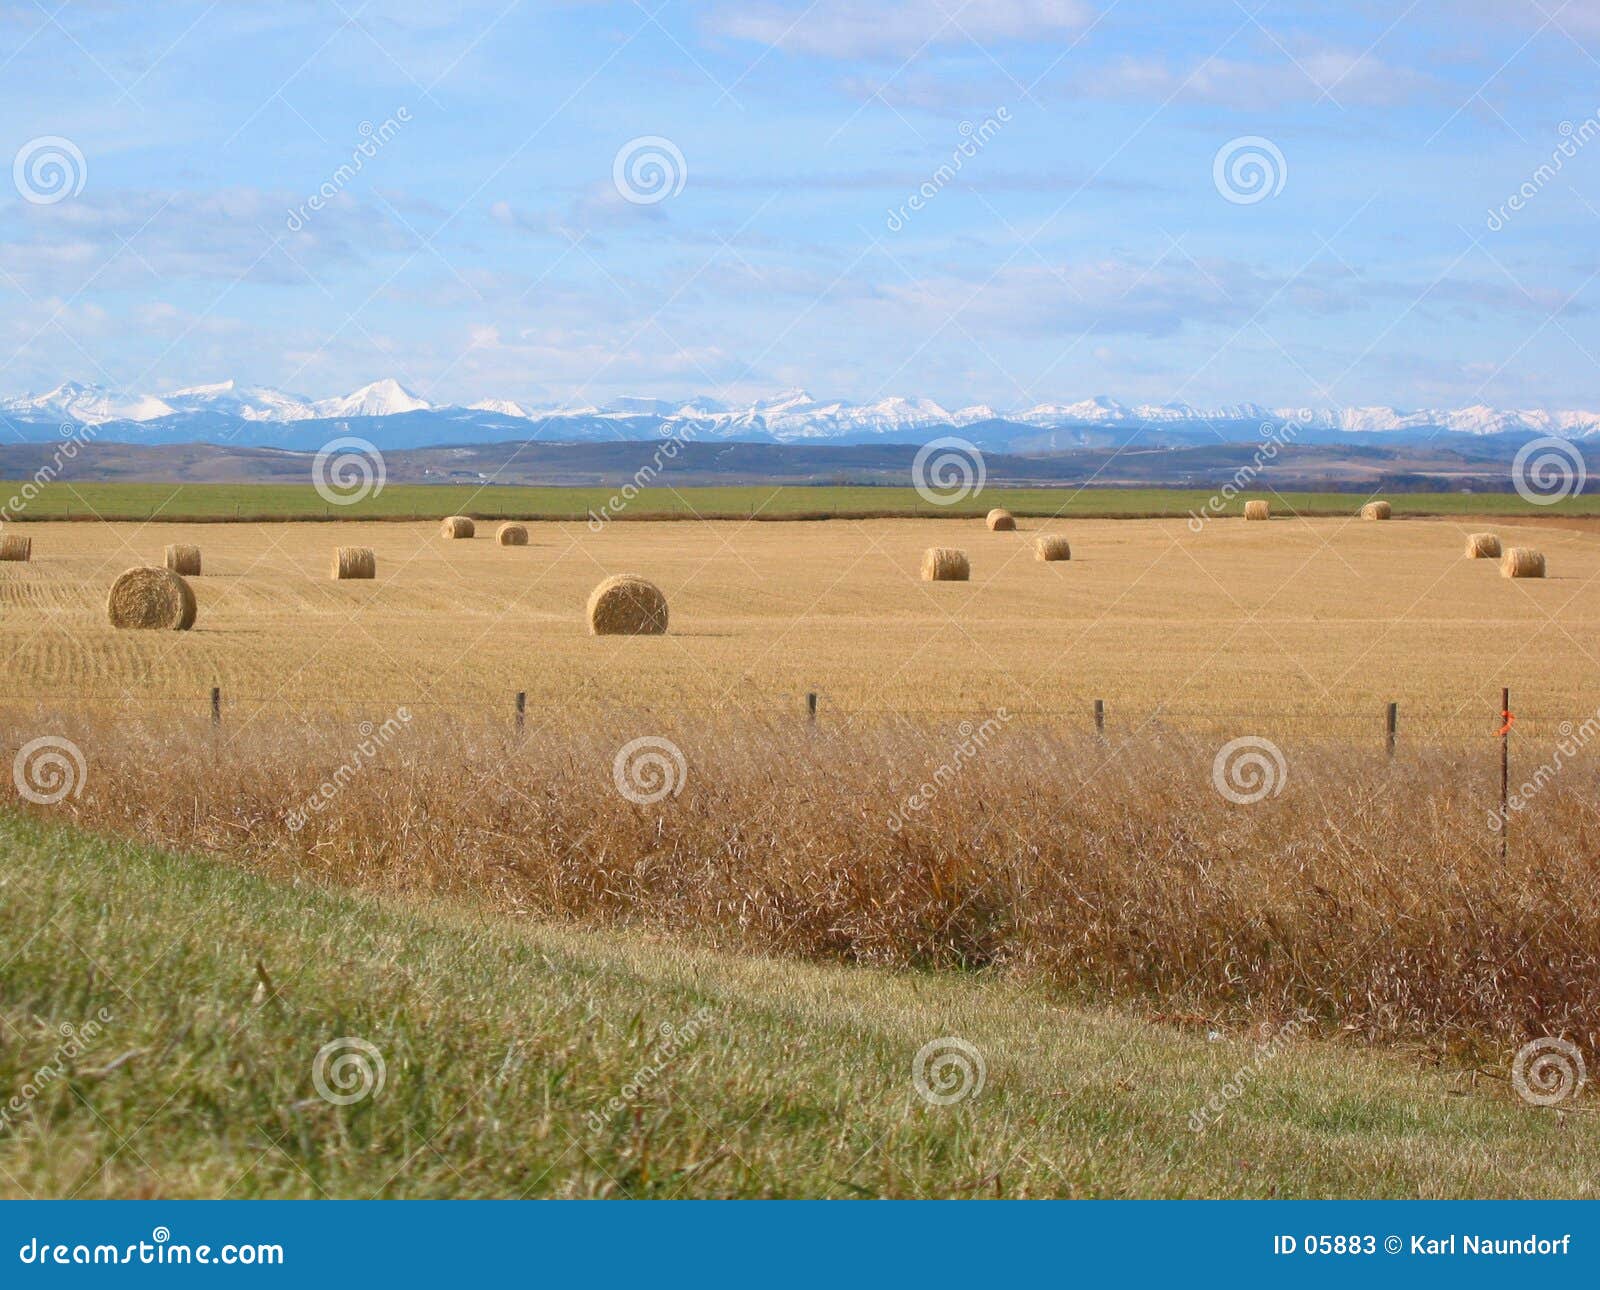 mountains, foothills, and bales